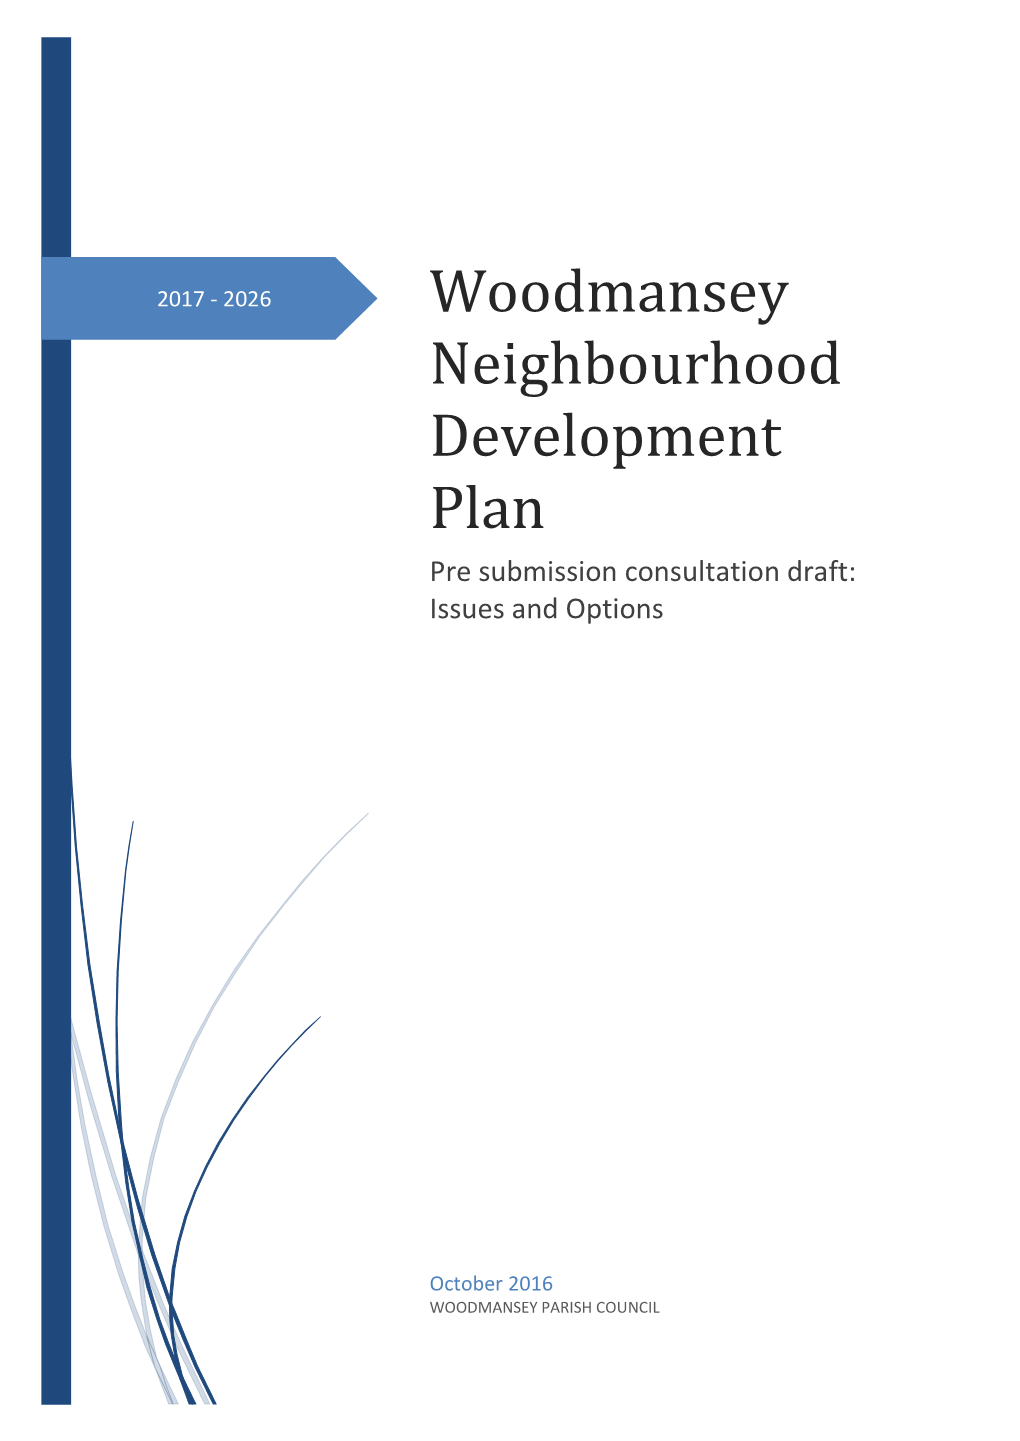 Woodmansey Neighbourhood Development Plan Pre Submission Consultation Draft: Issues and Options